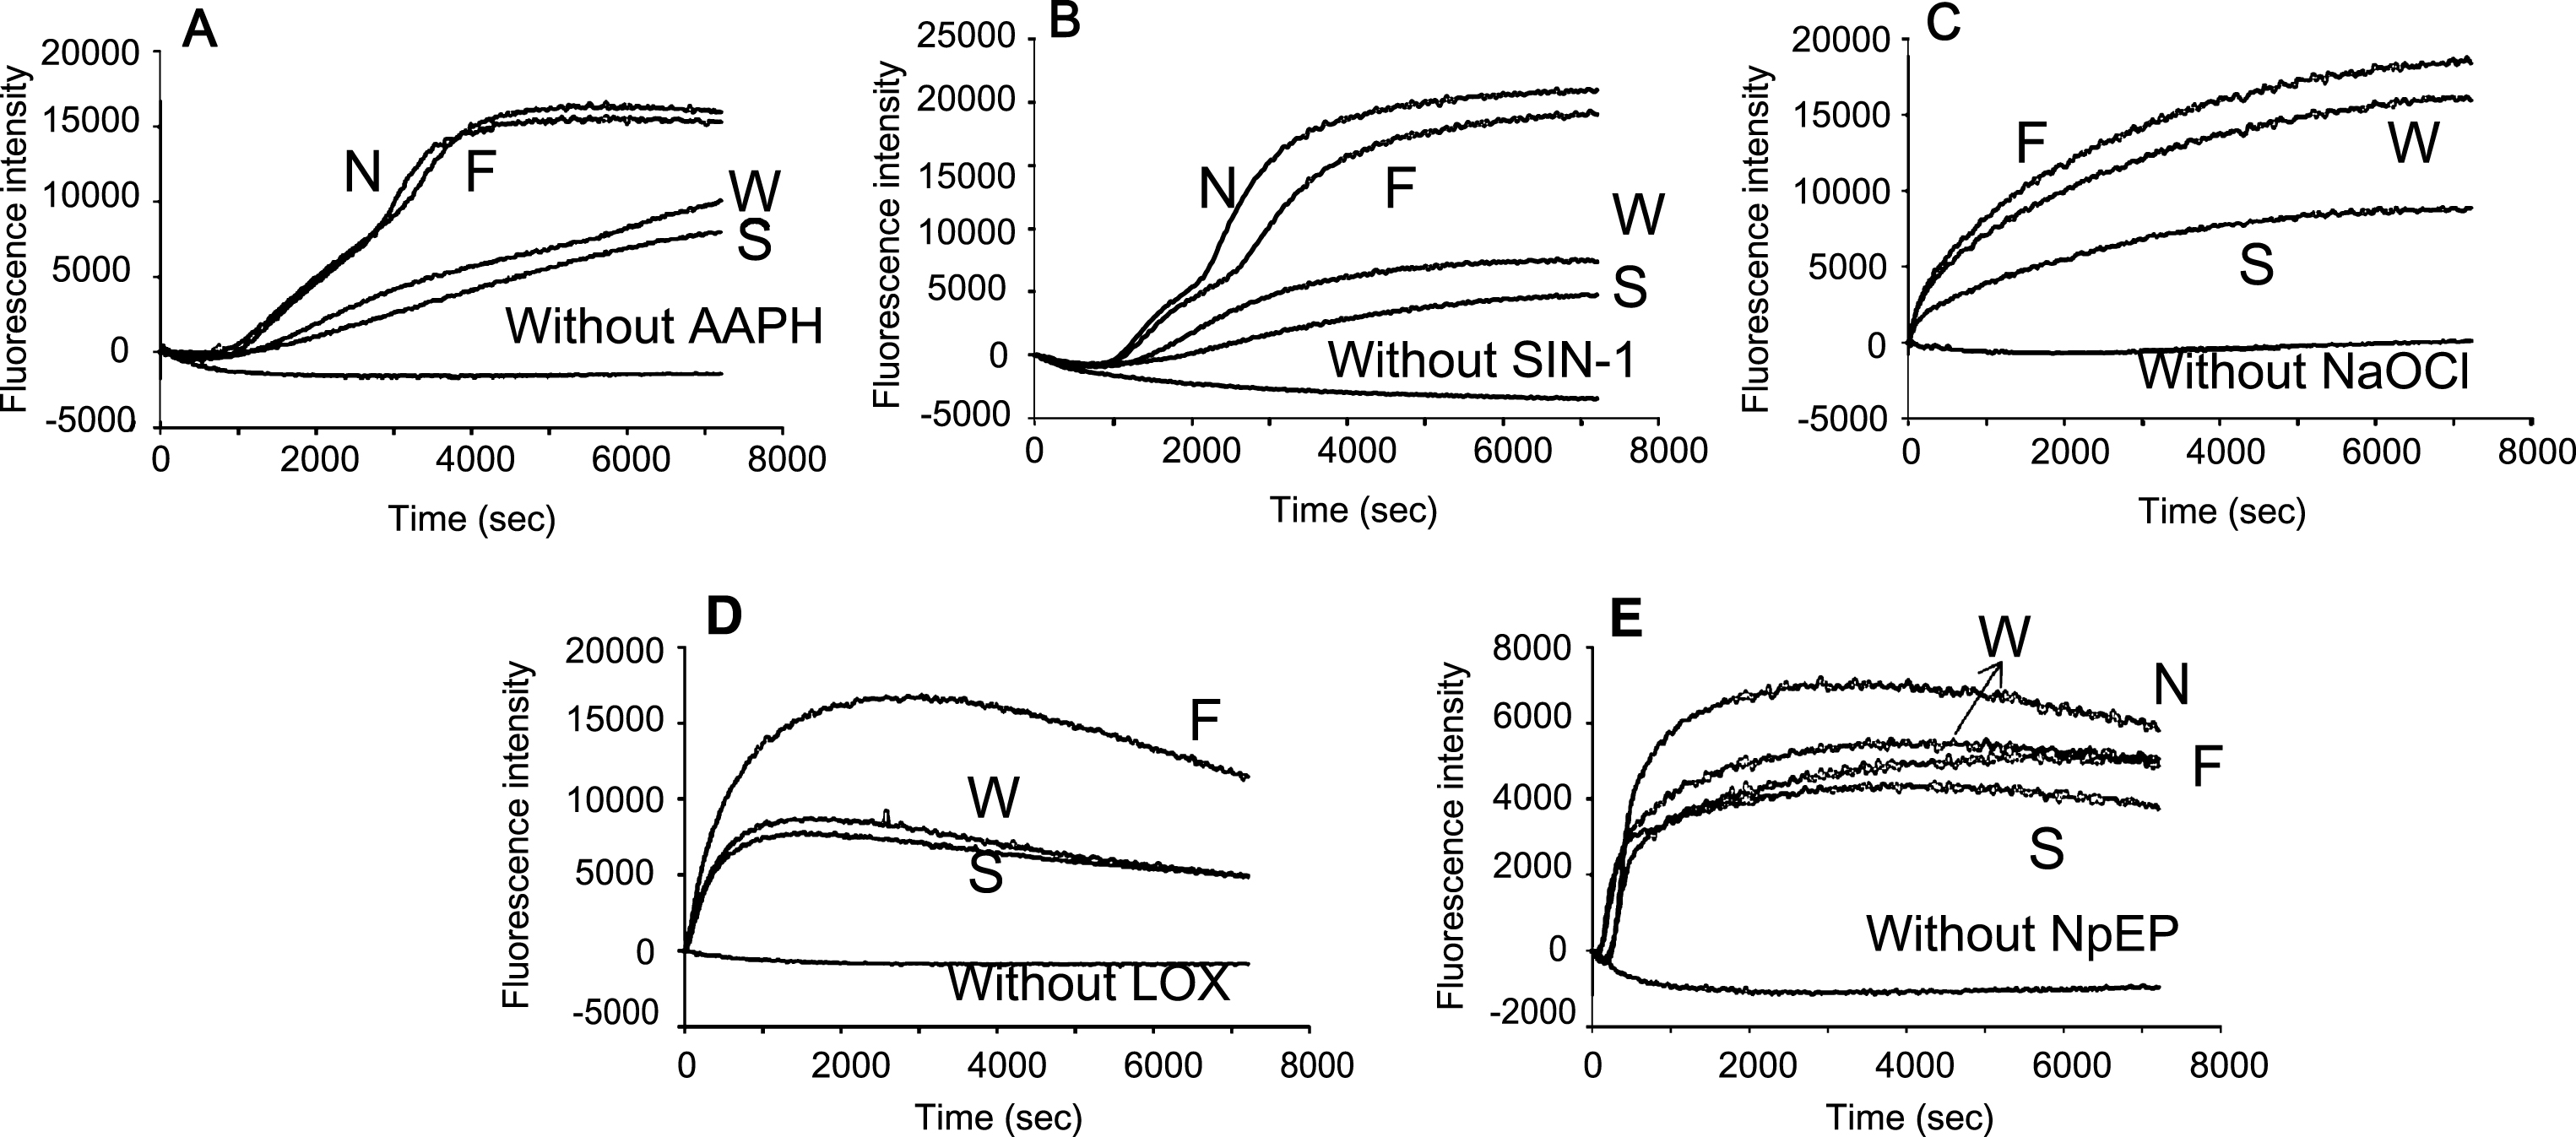 Inhibitory effects of blueberry extracts with water on the plasma oxidation (10%) induced by (A) AAPH (50 mM), (B) SIN-1 (0.5 mM), (C) NaOCl (0.5 mM), (D) 15-LOX (10000 nkat/mL), and (E) NpEP (5 mM). N: without extract; W, F, and S: Whole, fruit, and skin of blueberry respectively.